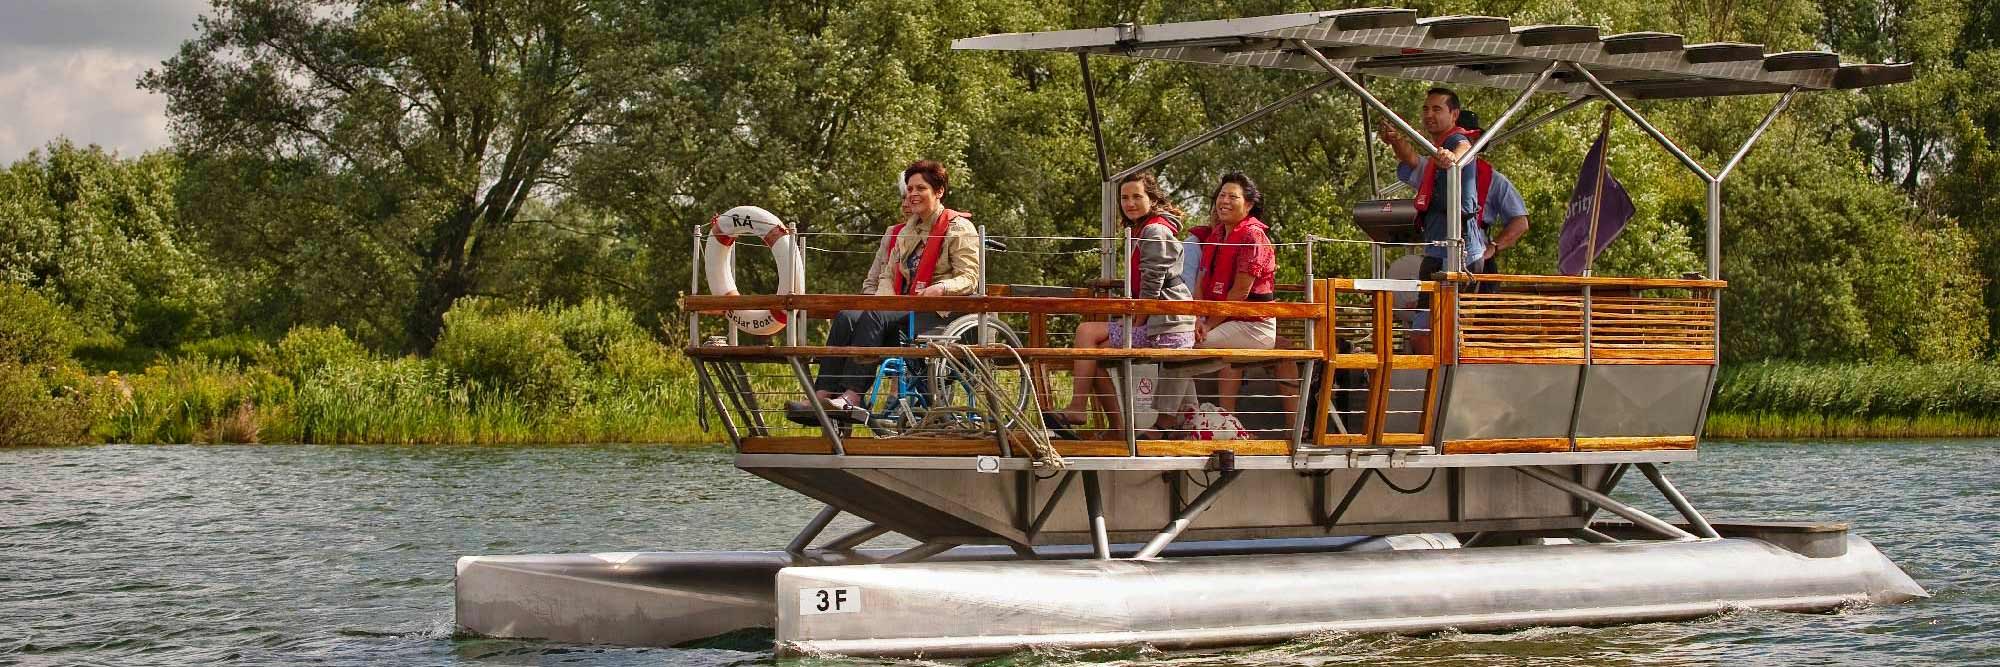 People, including a wheelchair user, on a solar boat on a lake